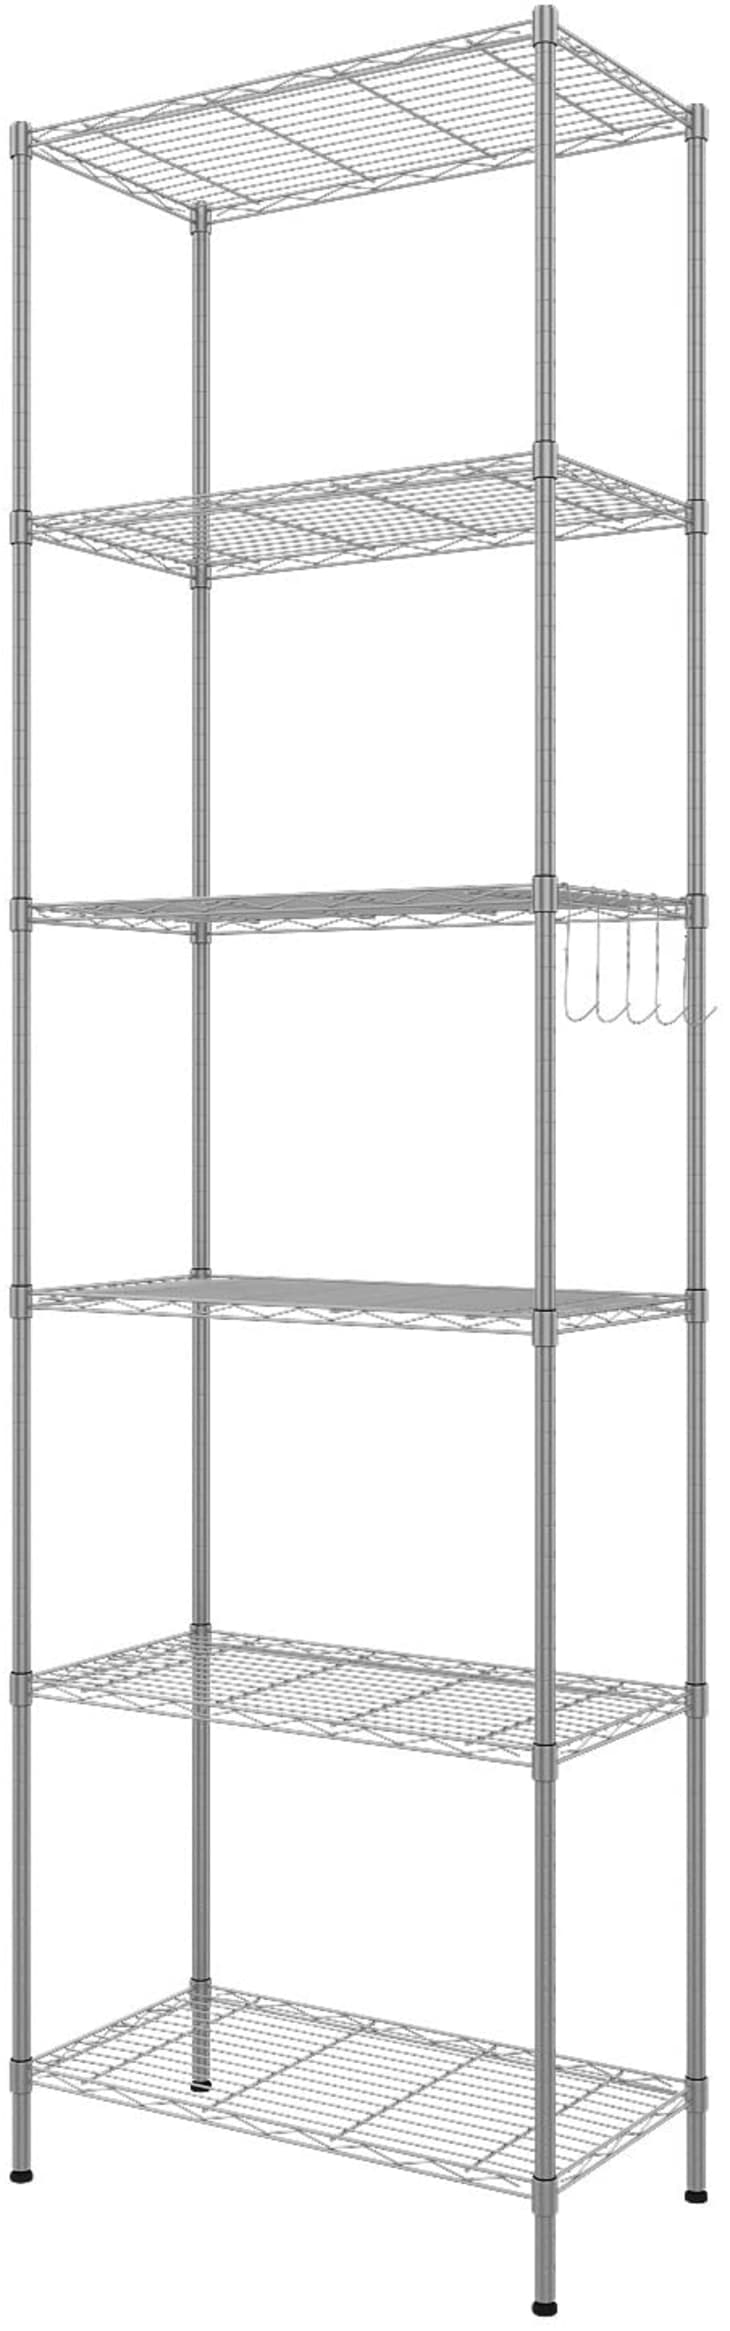 Homdox 6-Tier Storage Shelf Wire Shelving Unit Free Standing Rack with Adjustable Leveling Feet at Amazon